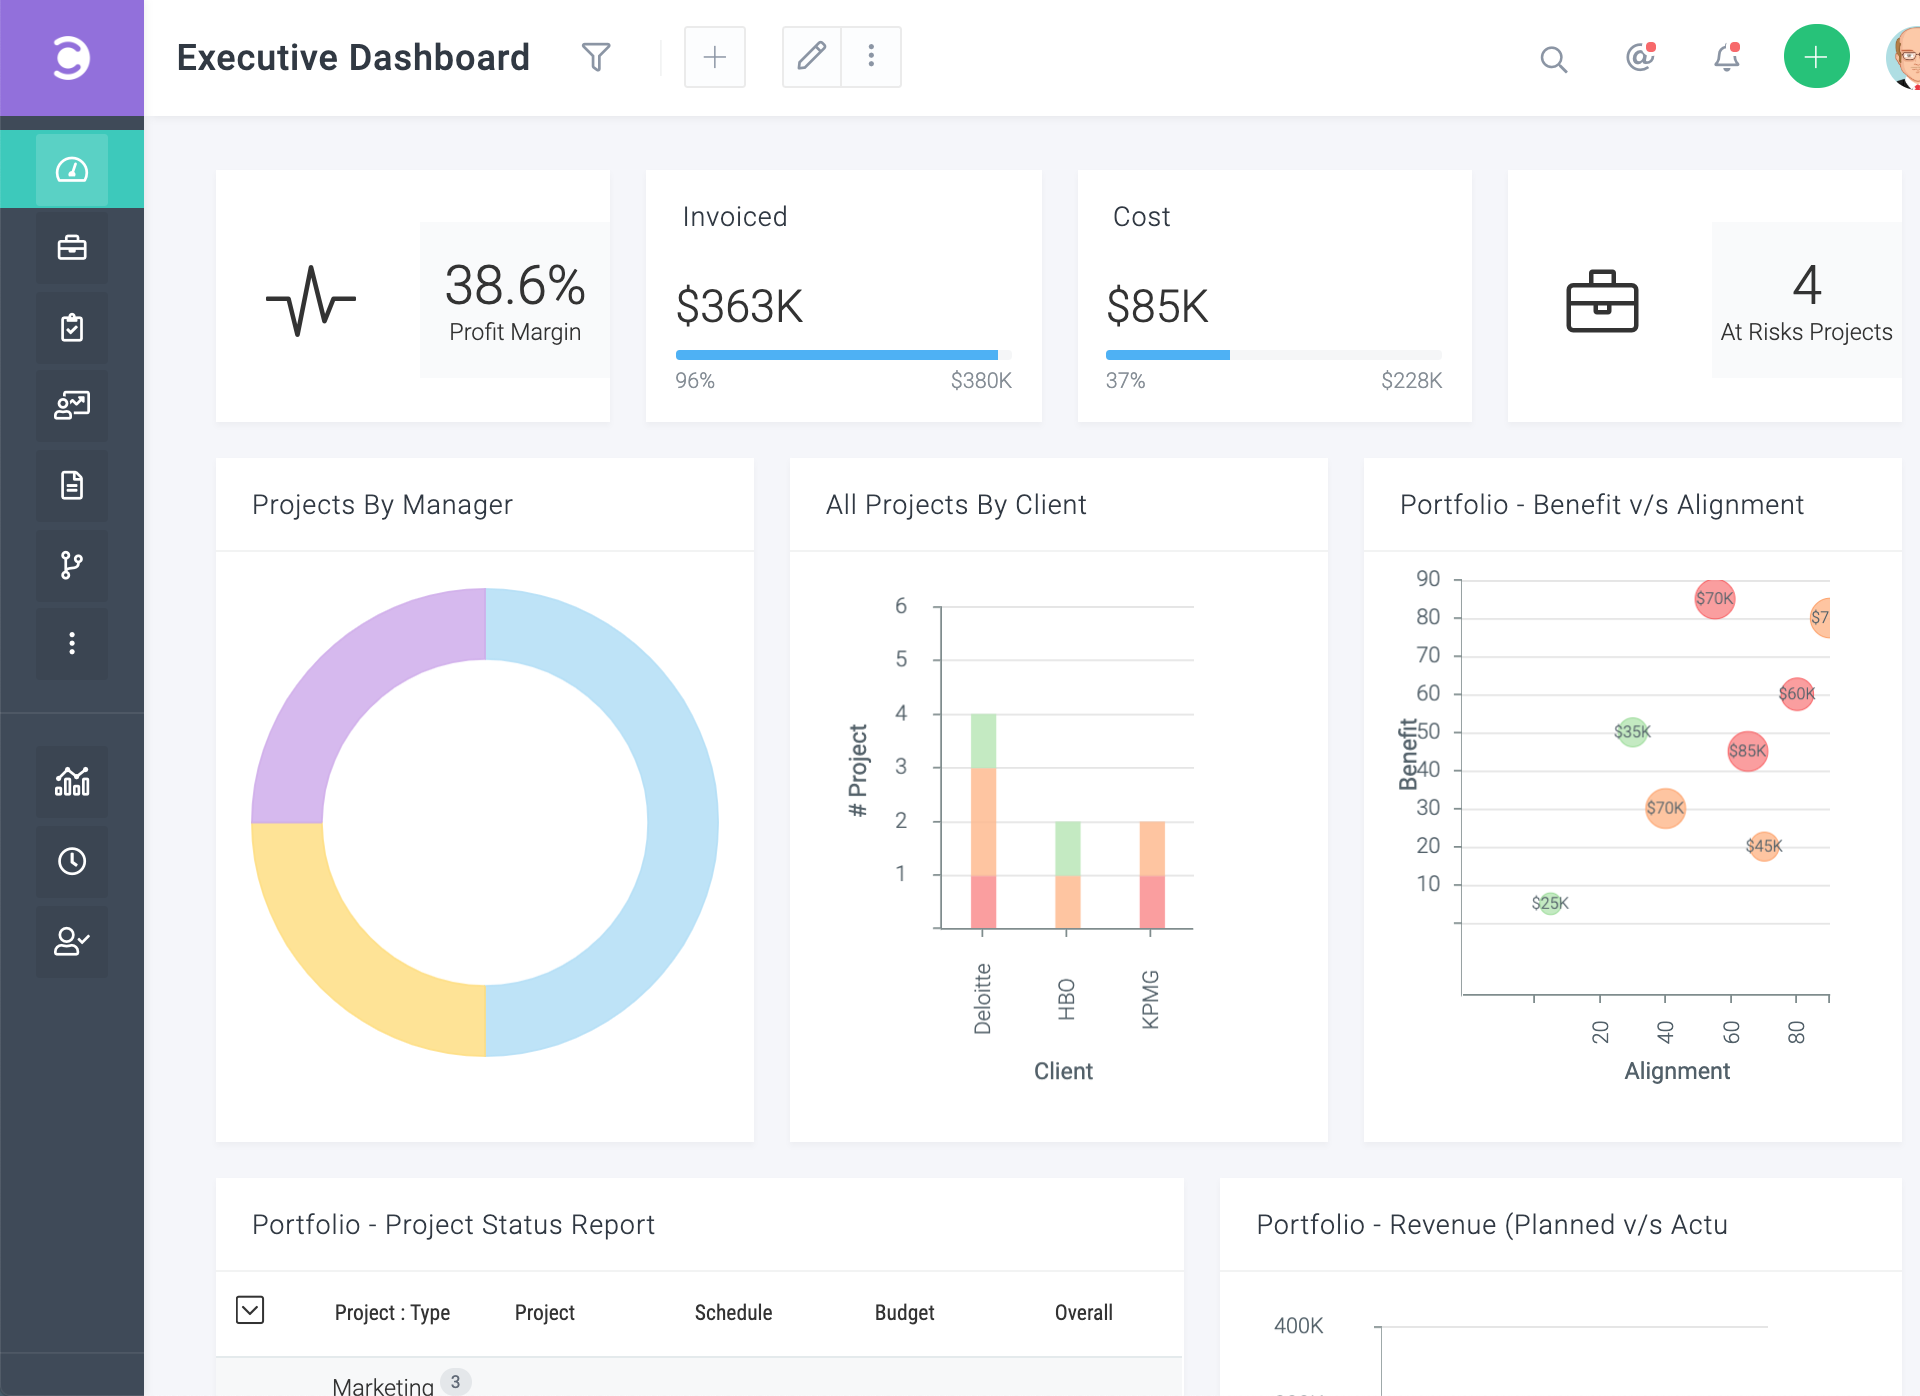 Celoxis dashboard provides a visual snapshot of your project portfolio. Stay on top of tasks, track progress, and monitor resource allocation effortlessly with real-time insights.